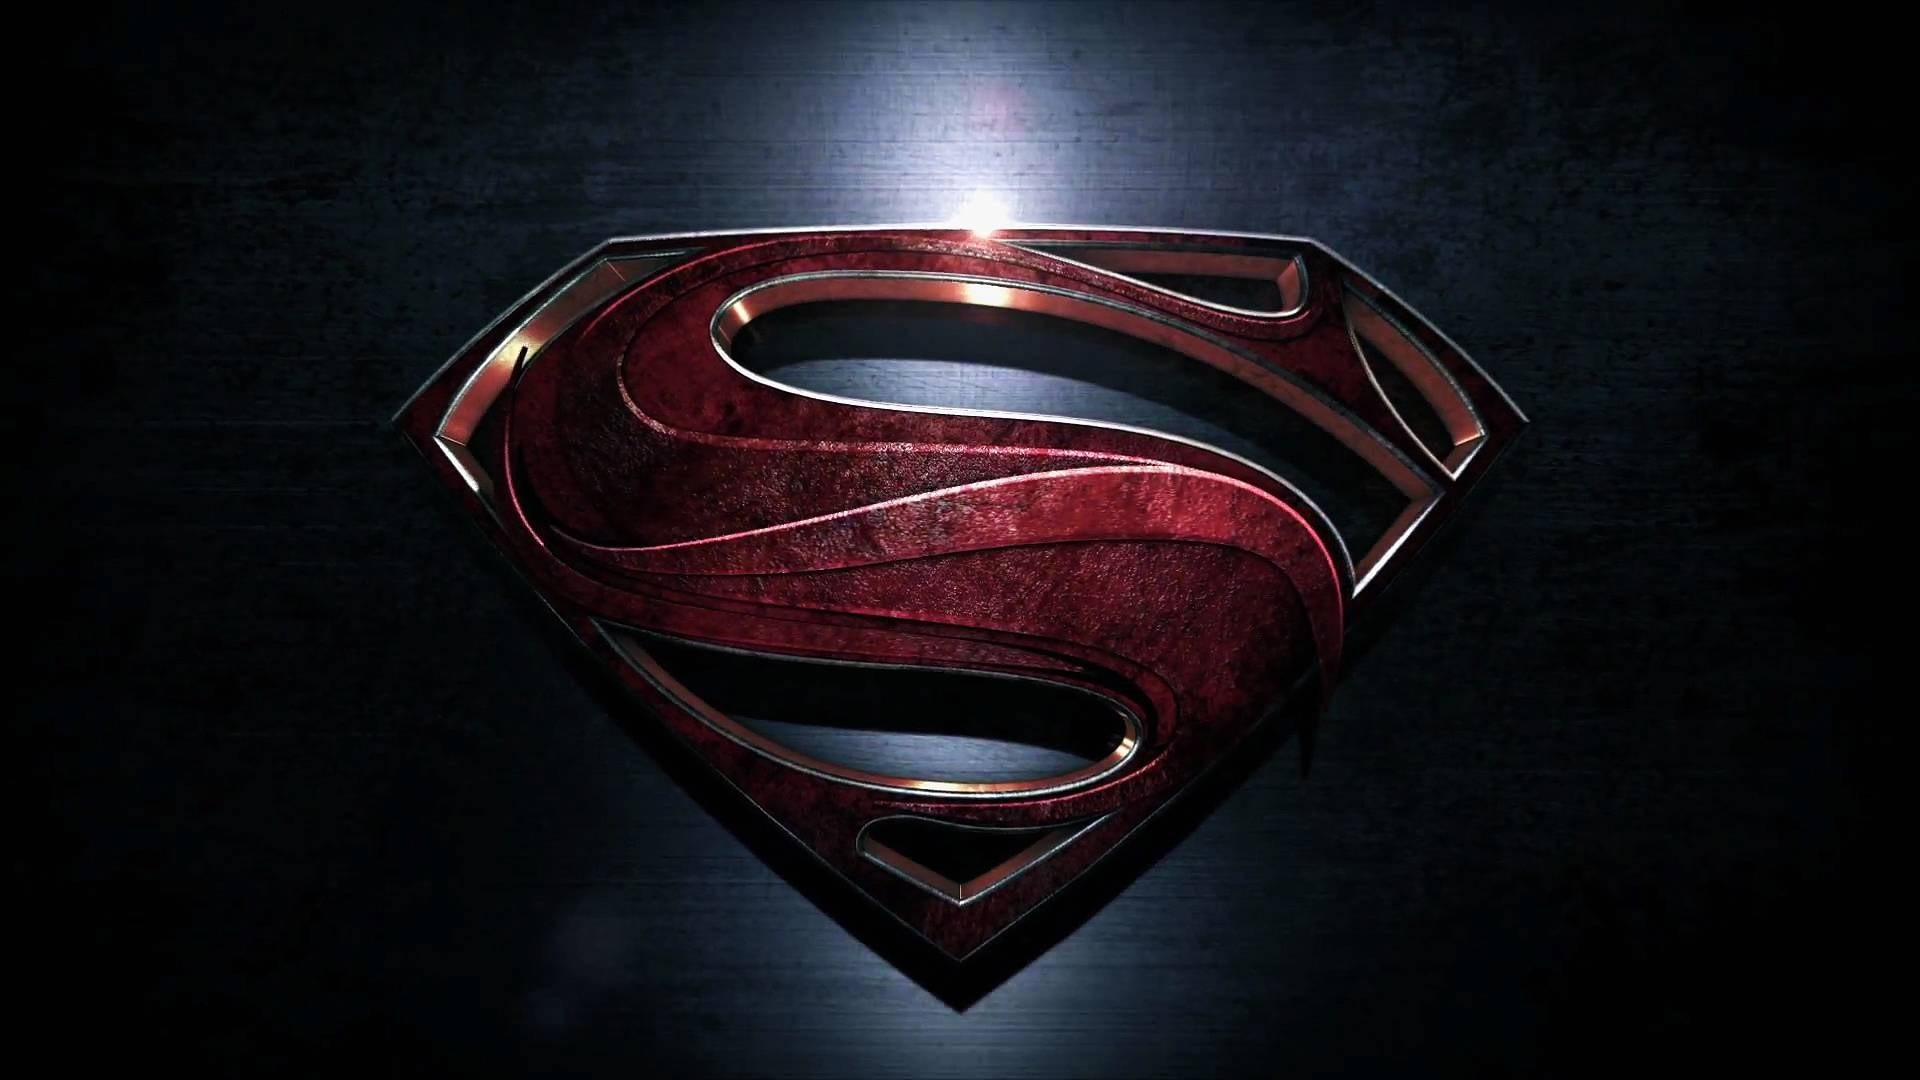 Explore Man Of Steel, Superman, and more man of steel wallpapers 1080p